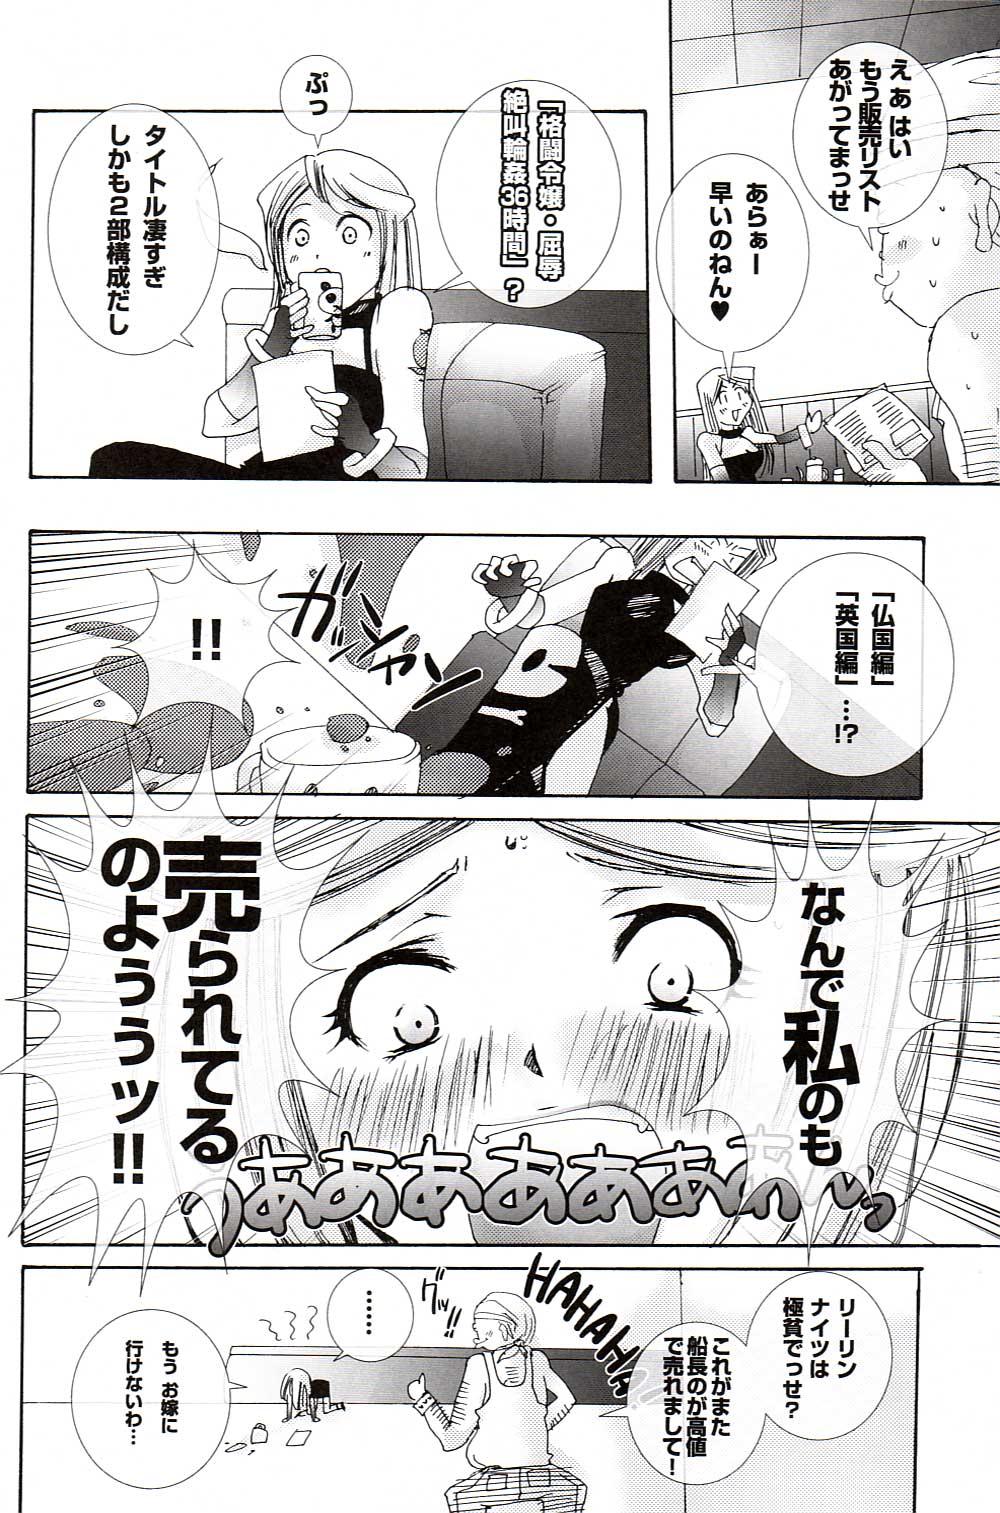 Pene Kaizoku Kizoku - King of fighters Shaved Pussy - Page 21